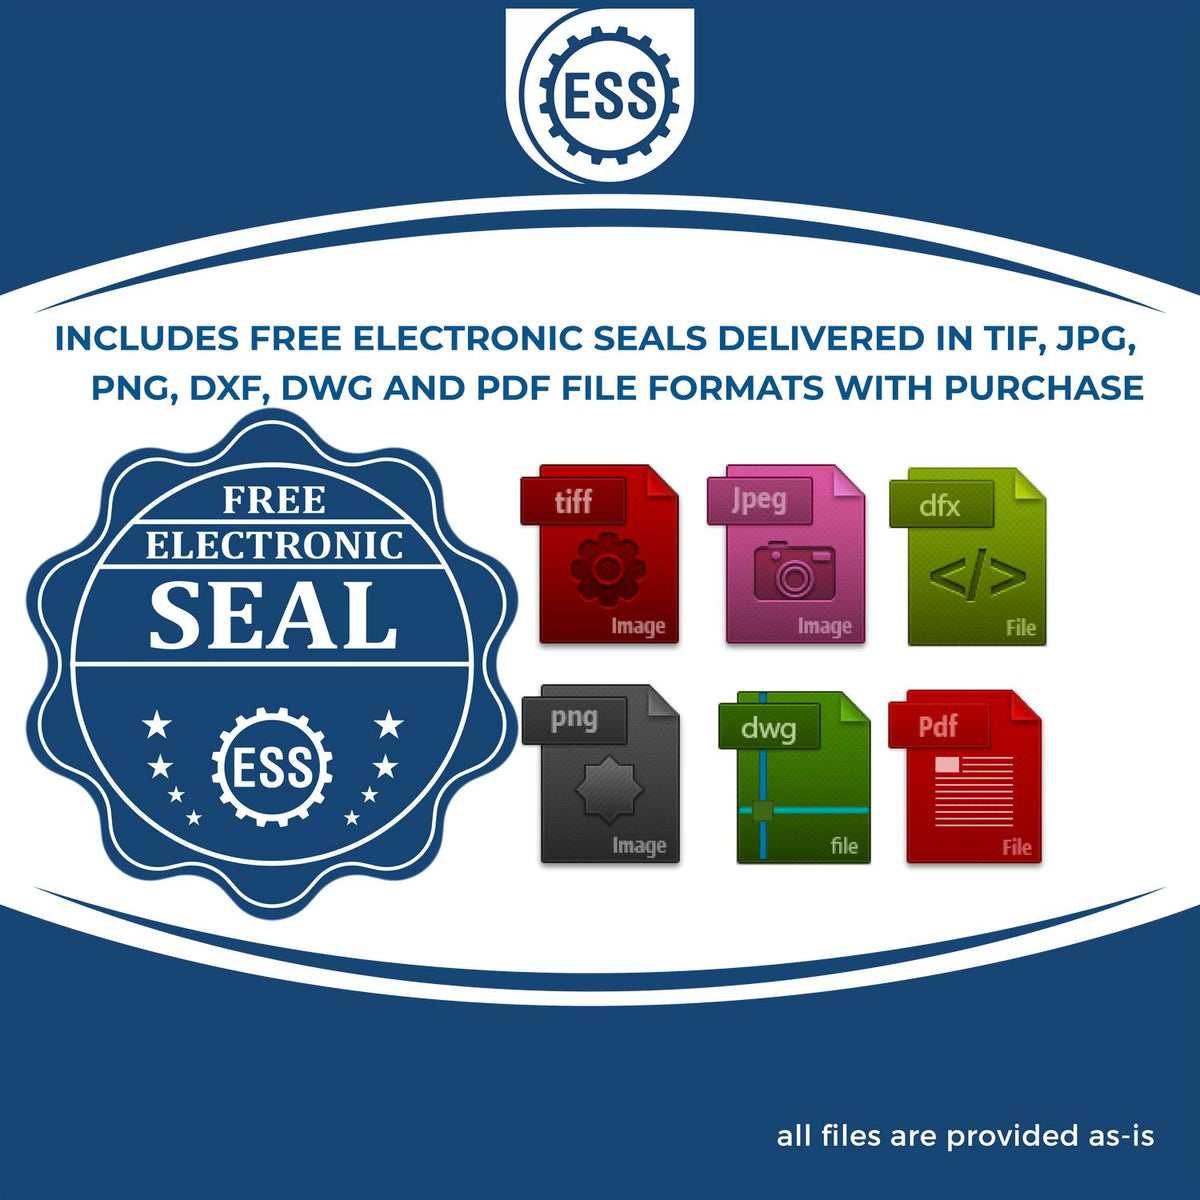 An infographic for the free electronic seal for the Slim Pre-Inked Rectangular Notary Stamp for Puerto Rico illustrating the different file type icons such as DXF, DWG, TIF, JPG and PNG.